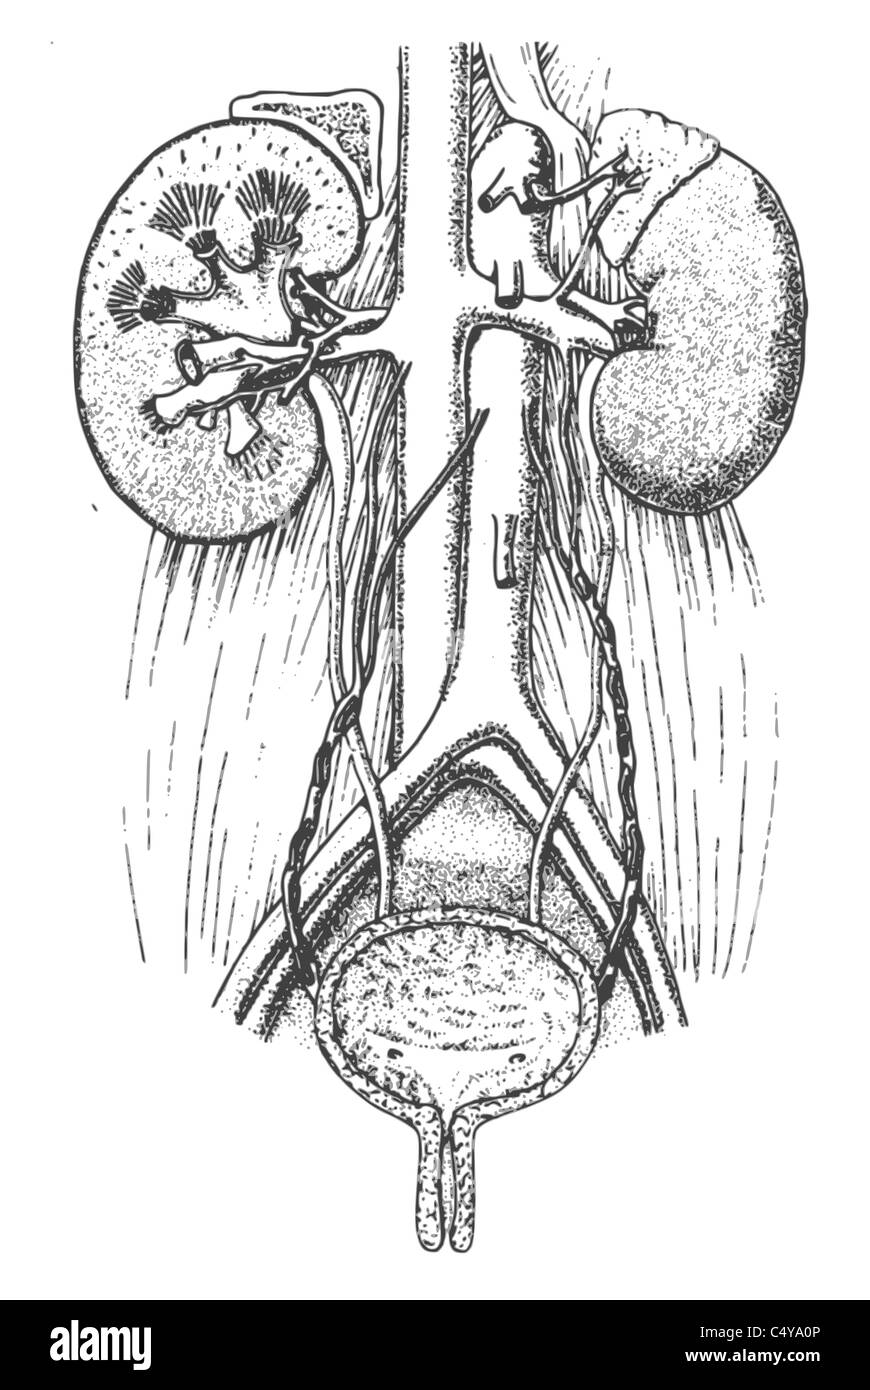 Bladder and kidney of human Stock Photo